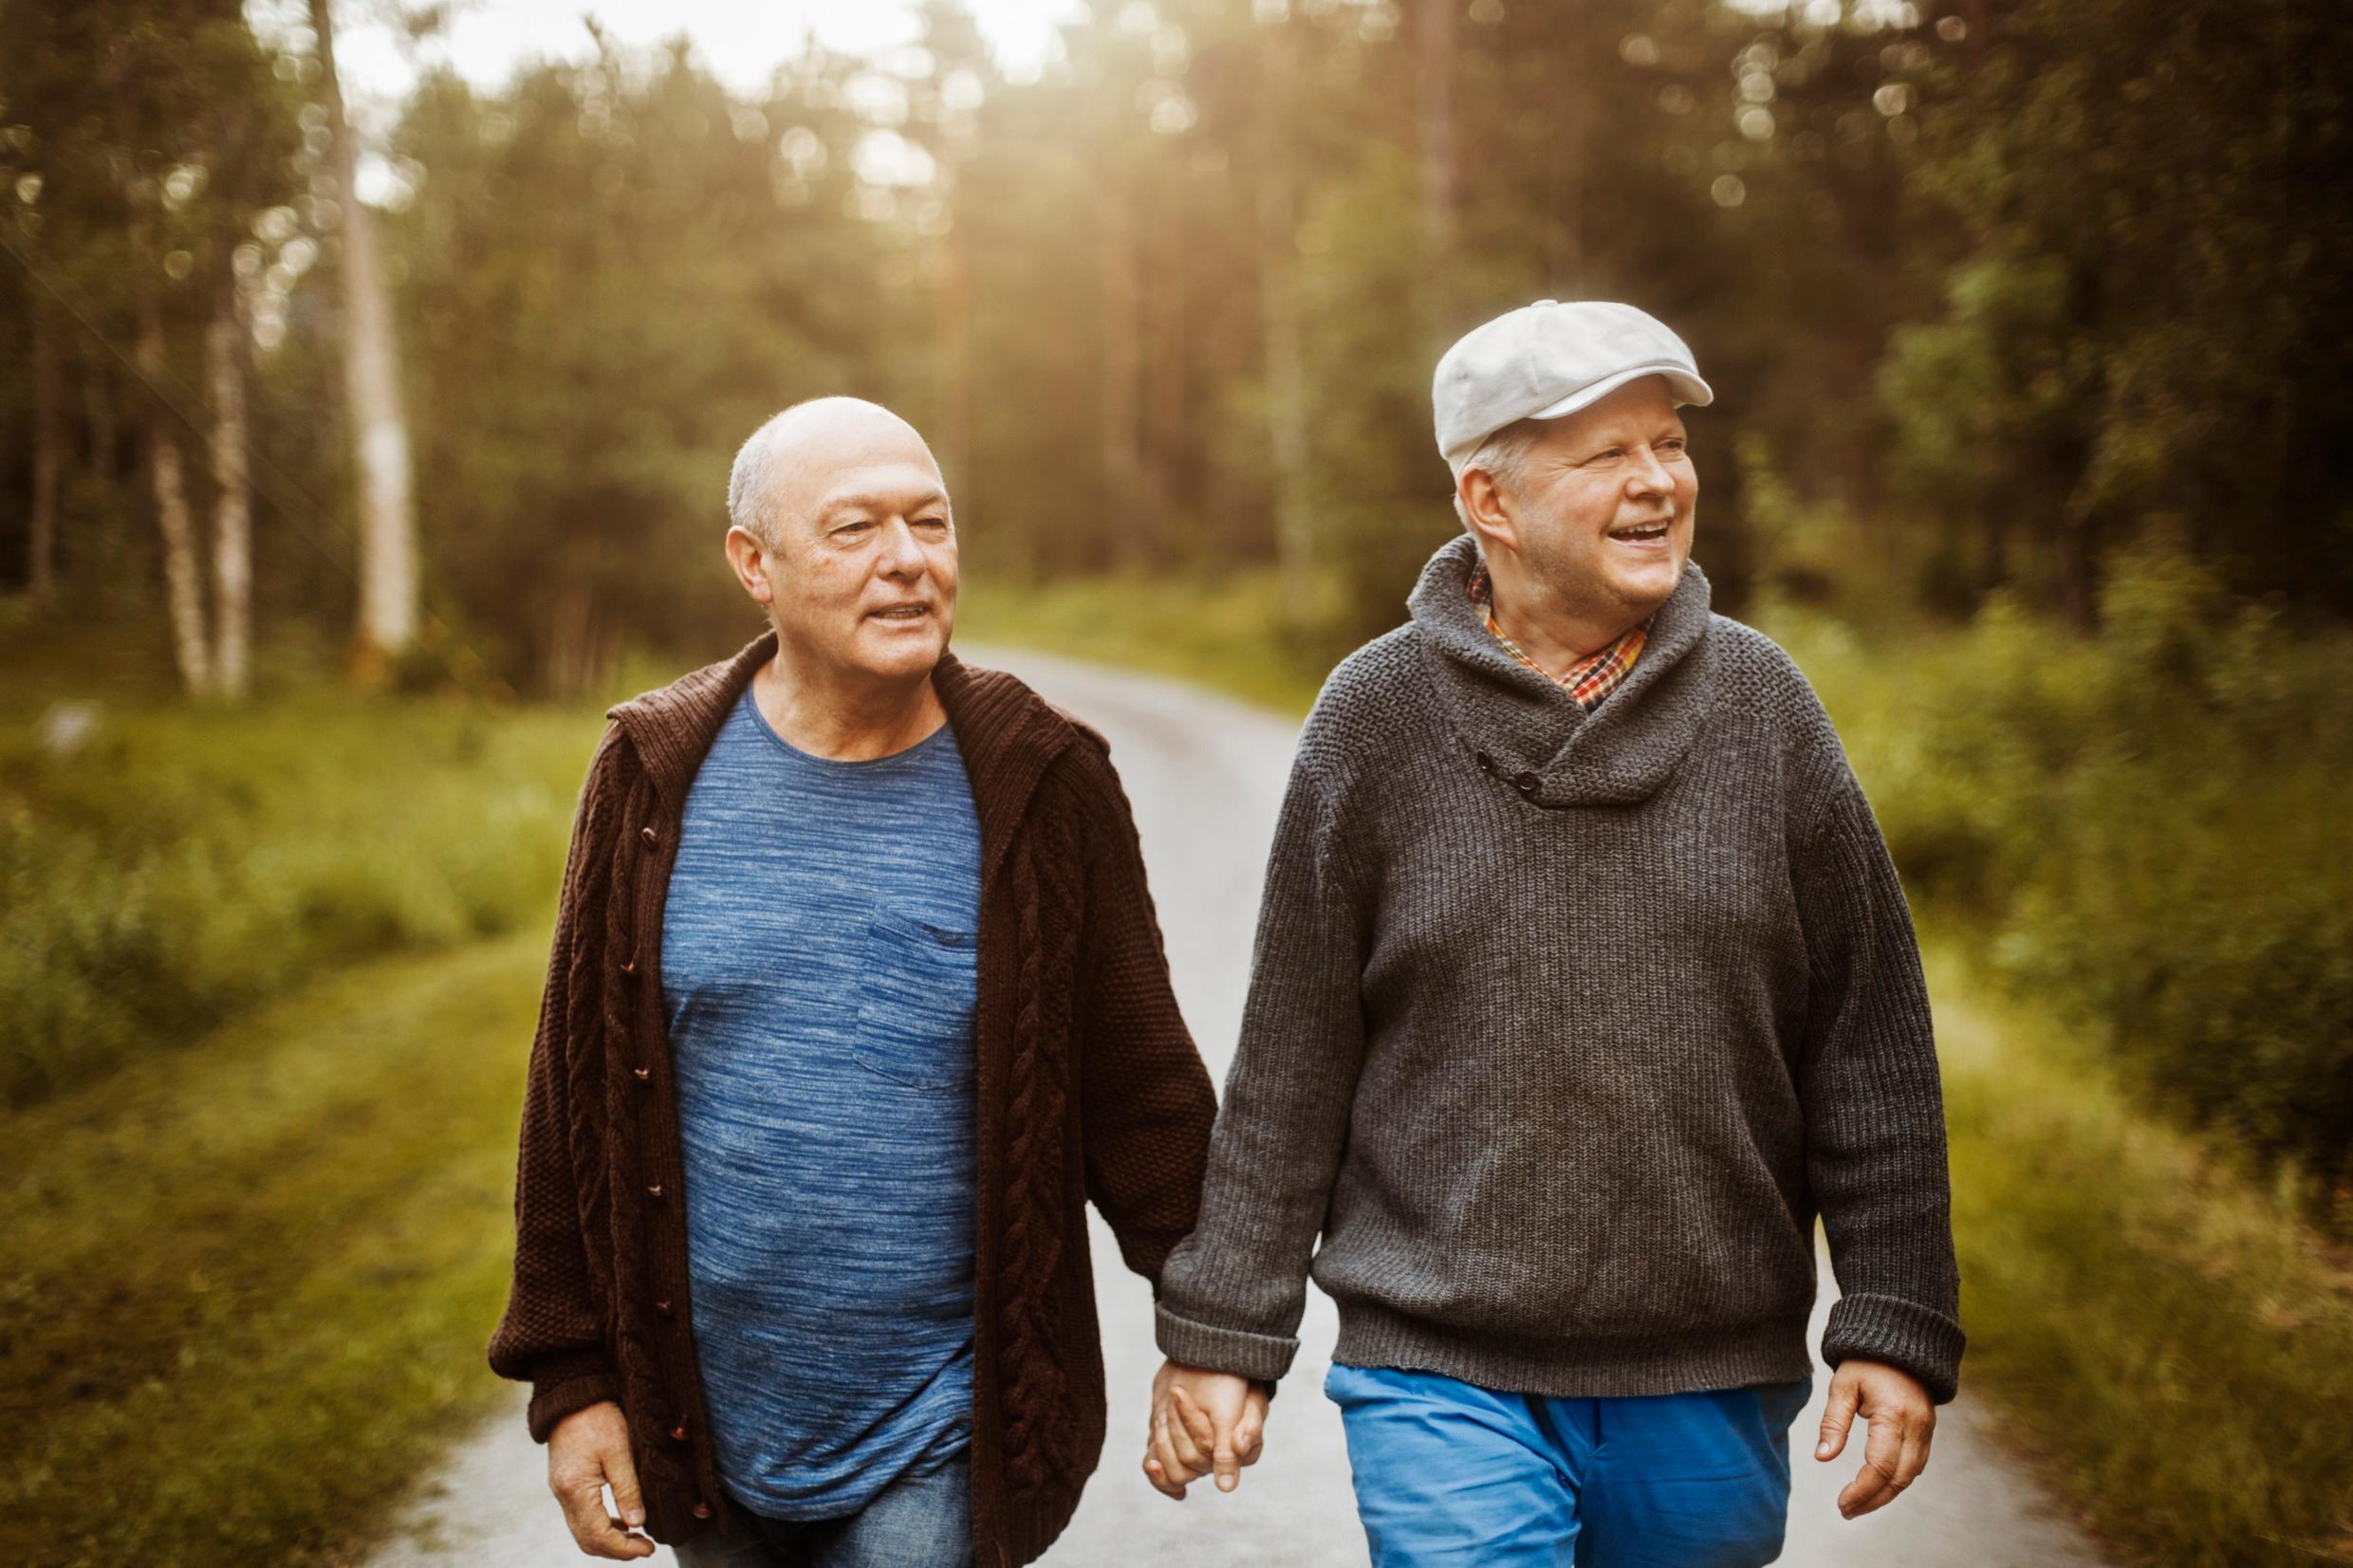 Two older men holding hands outdoors in nature.